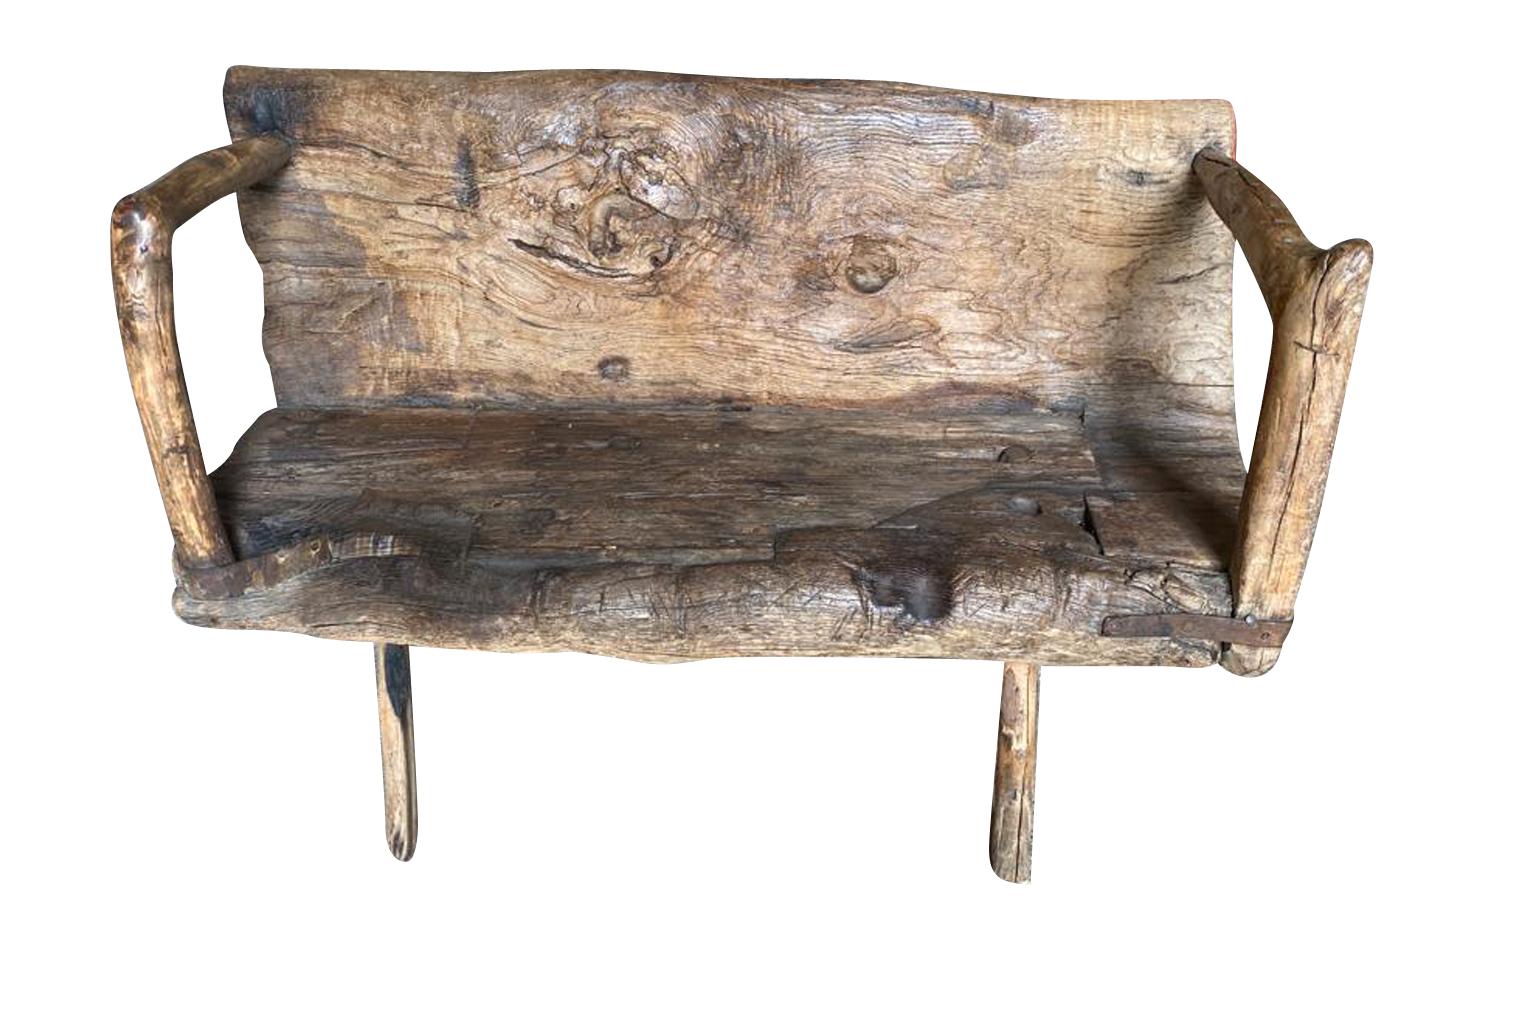 A delightful 17th century Arte Populaire Bench from the Cevennes region of France.  Wonderfully constructed from chestnut with the back and seat being a single piece carved from a trunk with iron strapping.  Fabulous patina and charm.  The seat